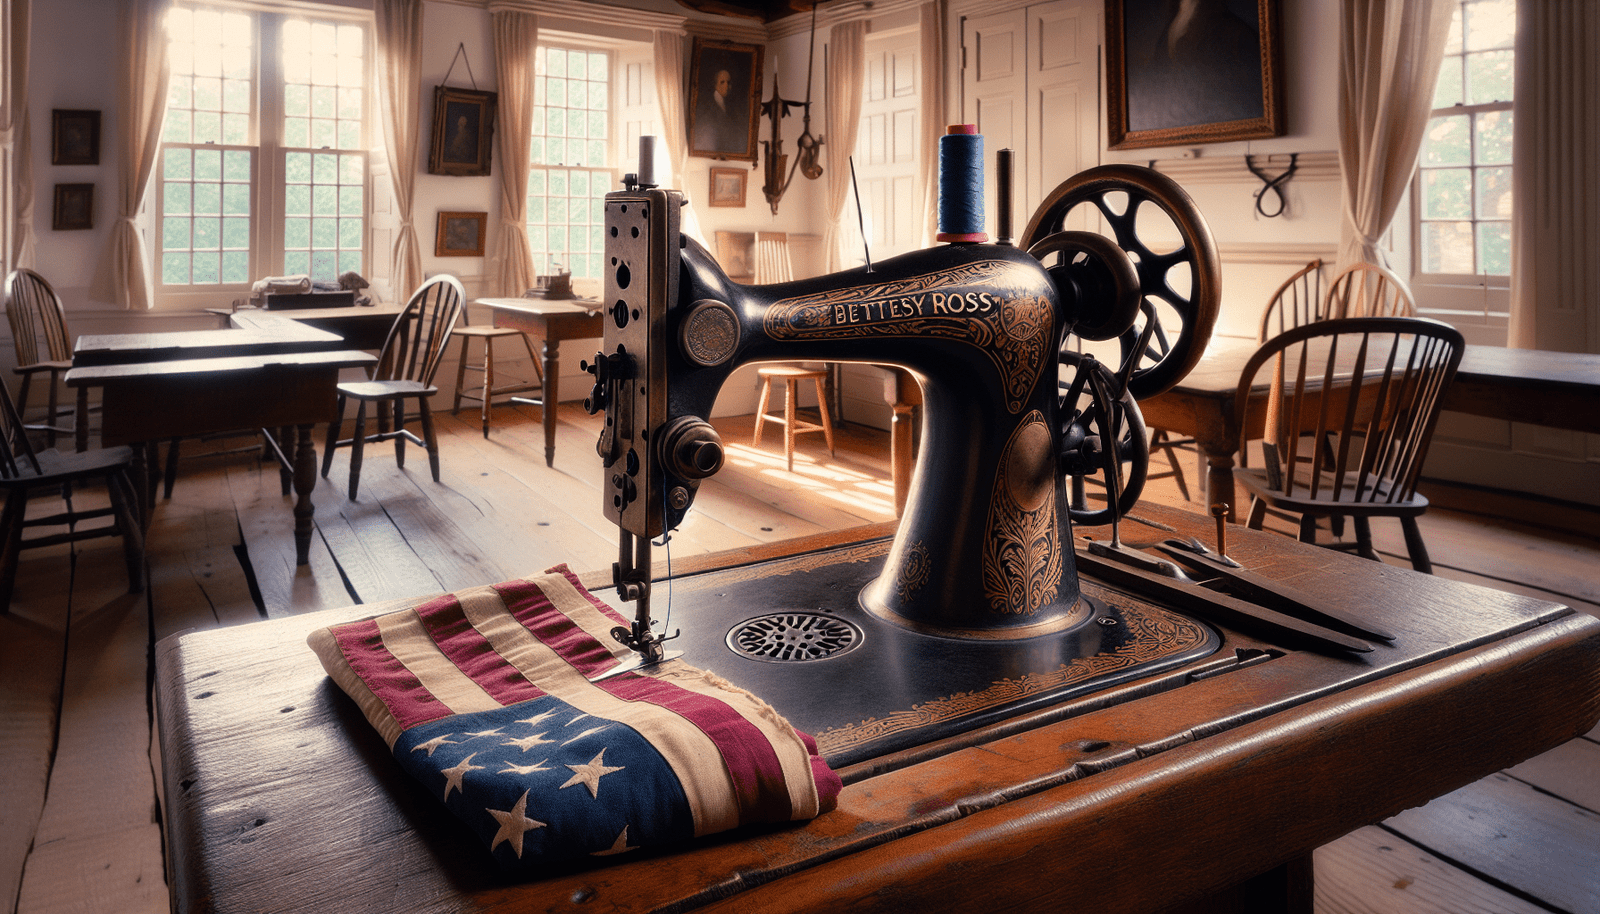 Watch History Come Alive At The Betsy Ross House